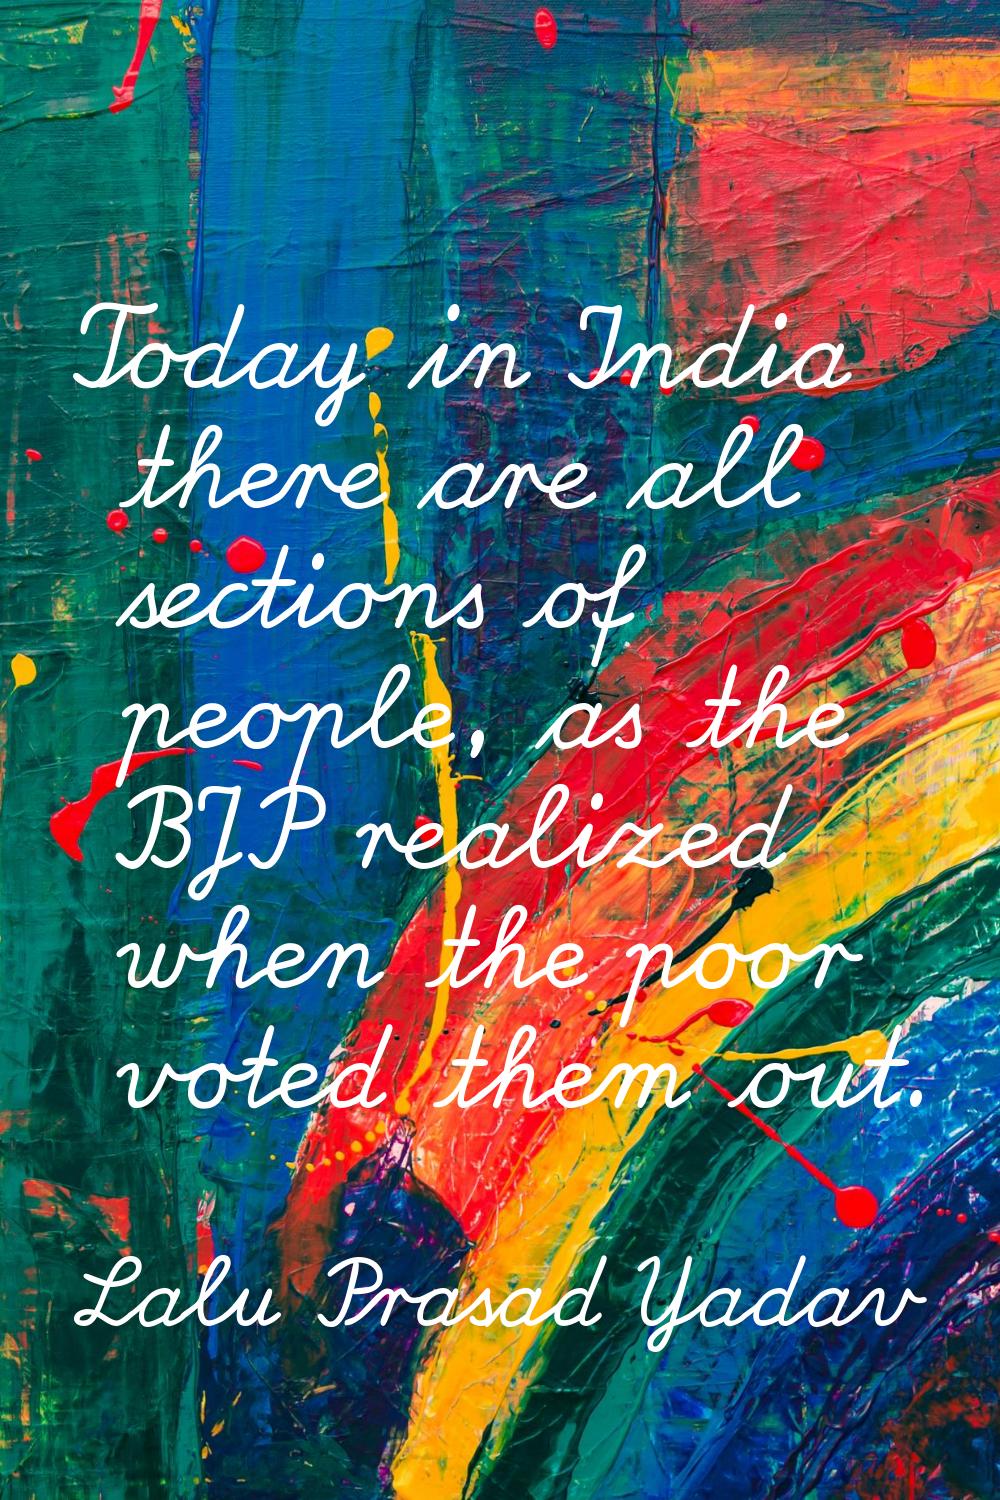 Today in India there are all sections of people, as the BJP realized when the poor voted them out.